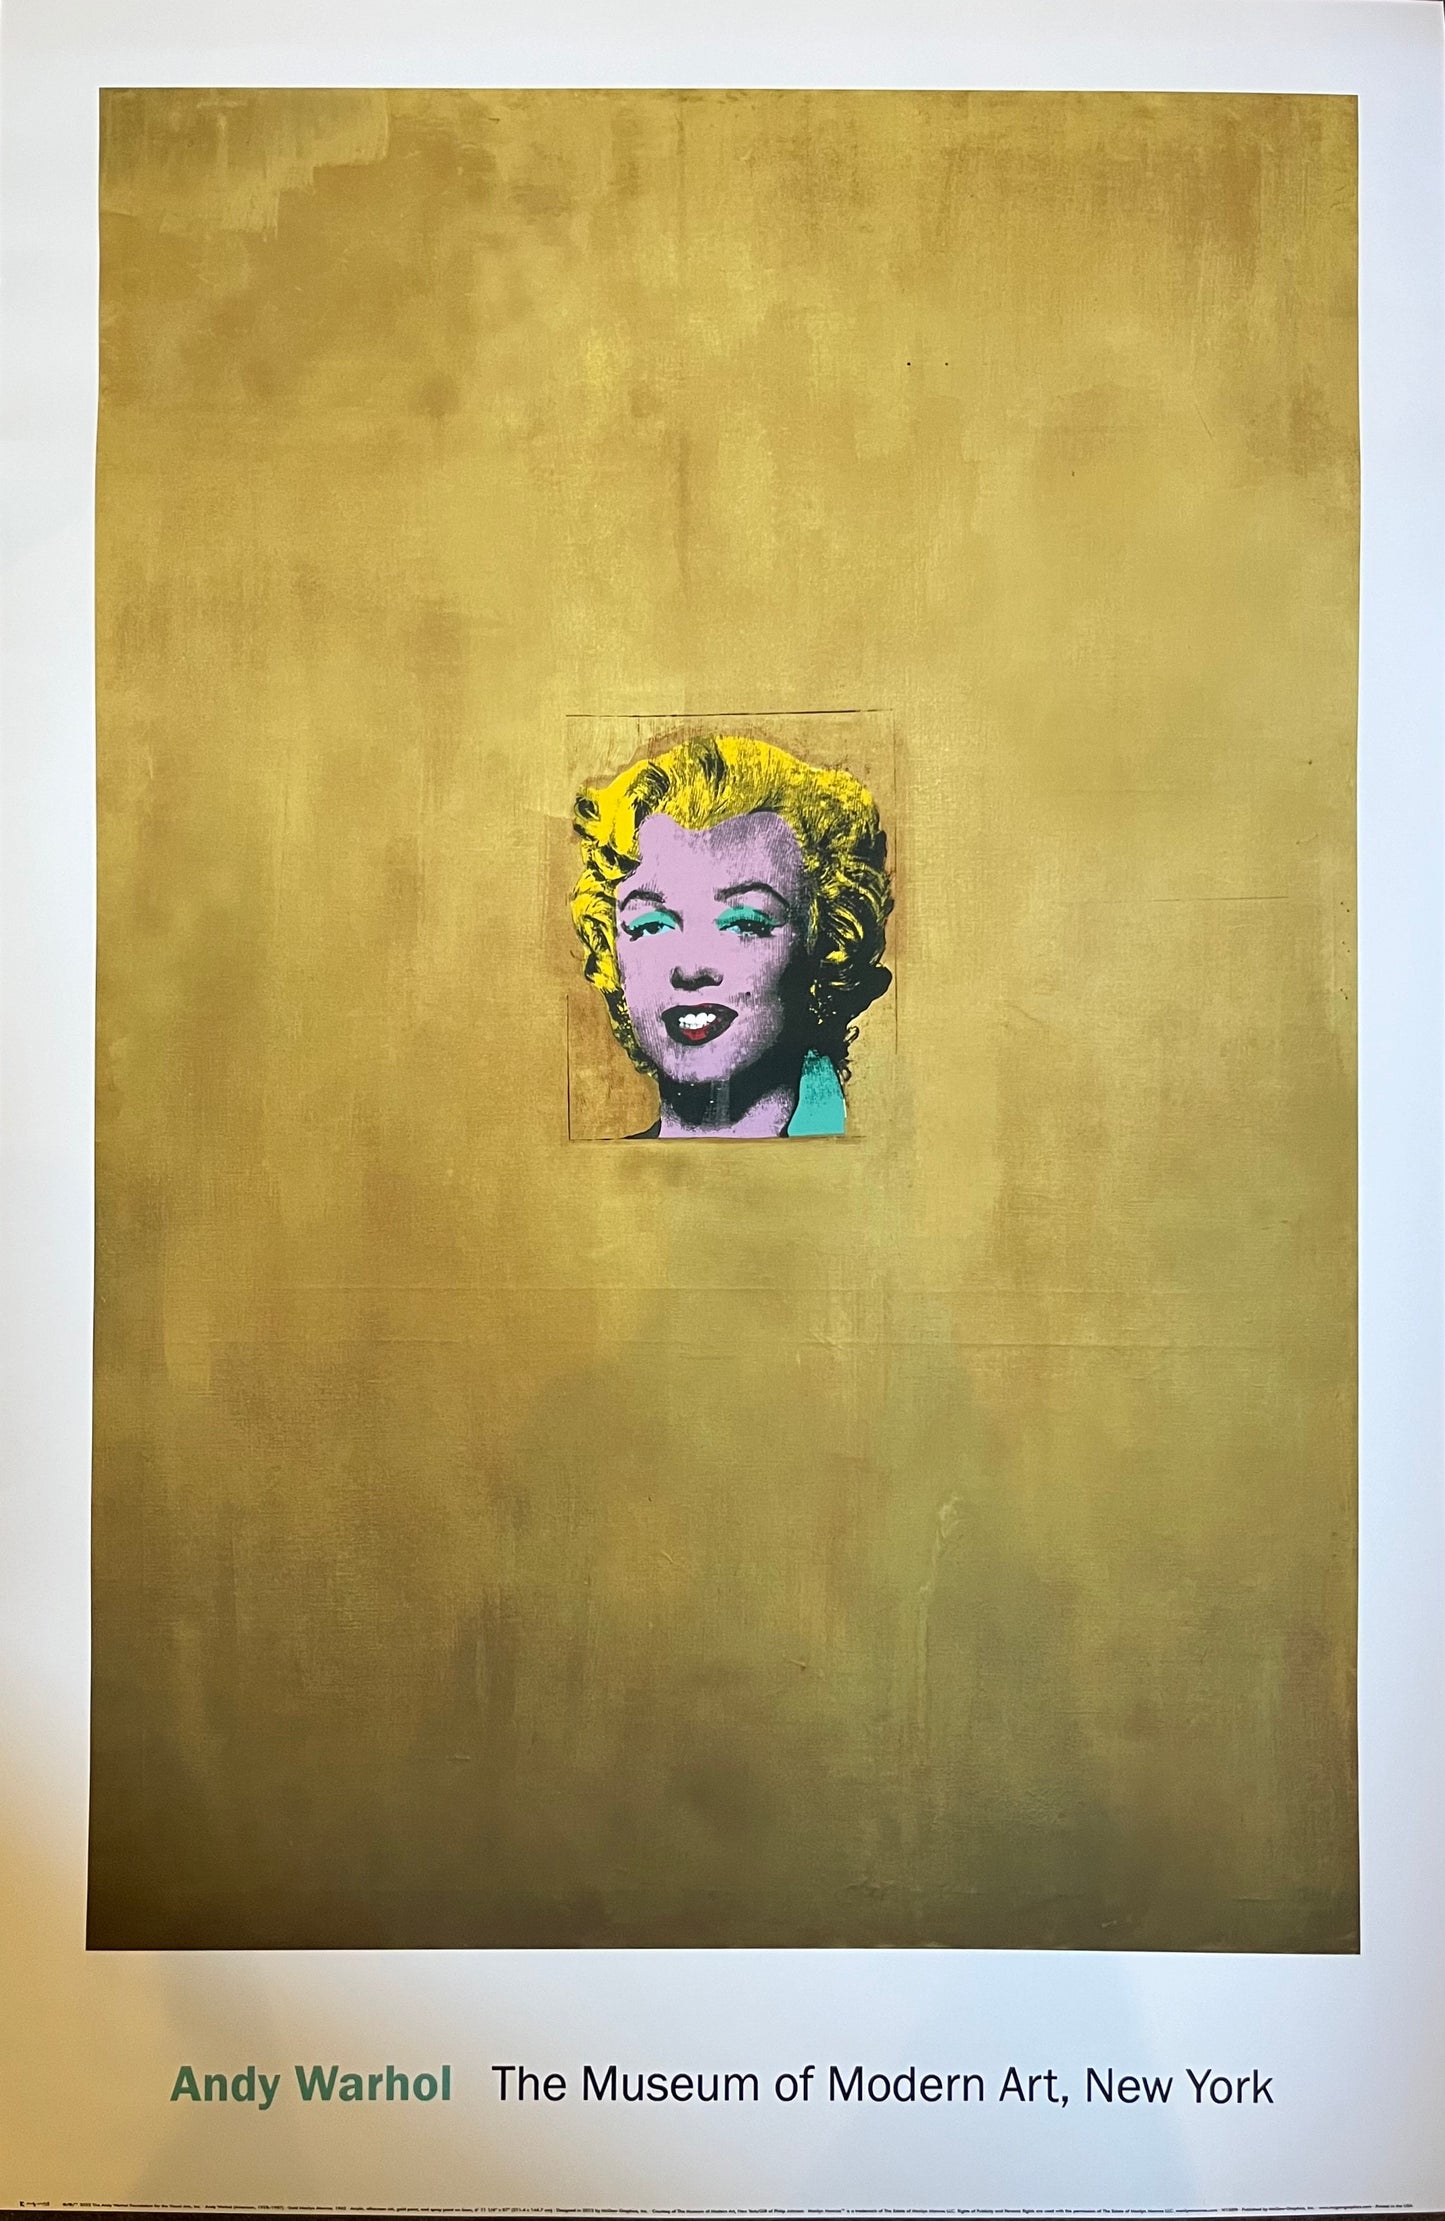 Andy Warhol, Gold Marilyn Monroe, 1962, Offset Lithograph